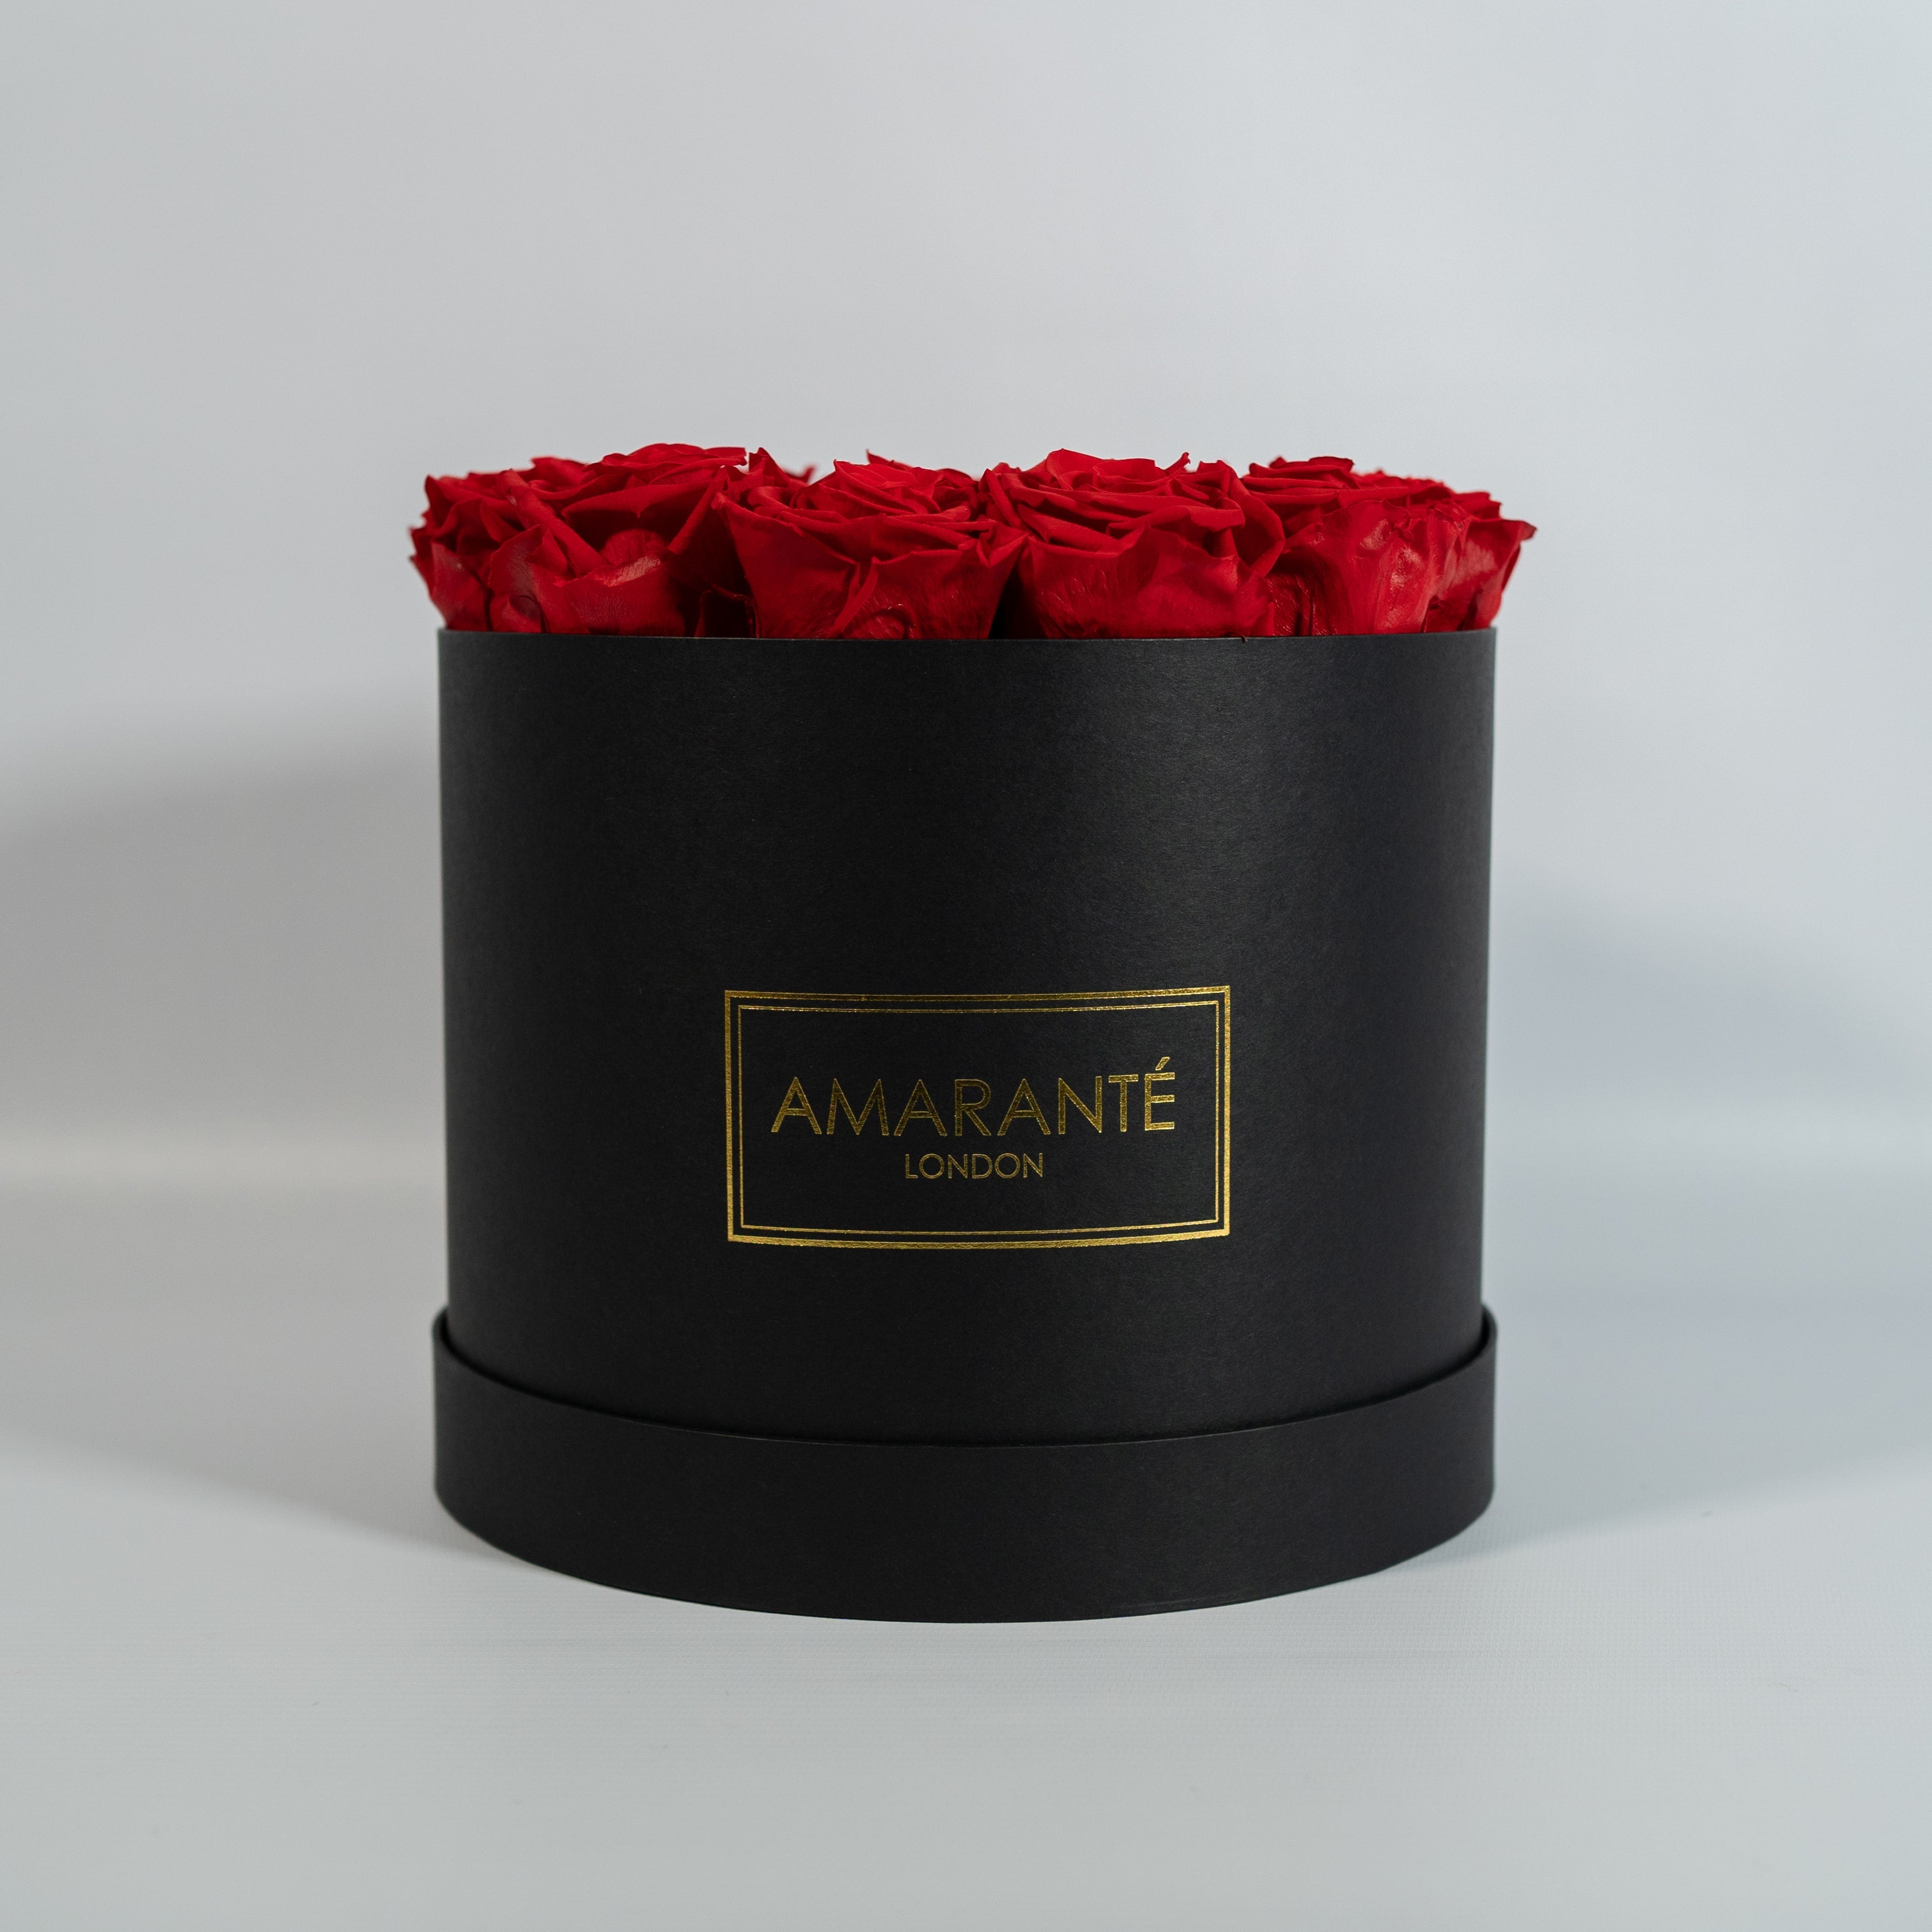 Enchanting red Roses denoting romance and love